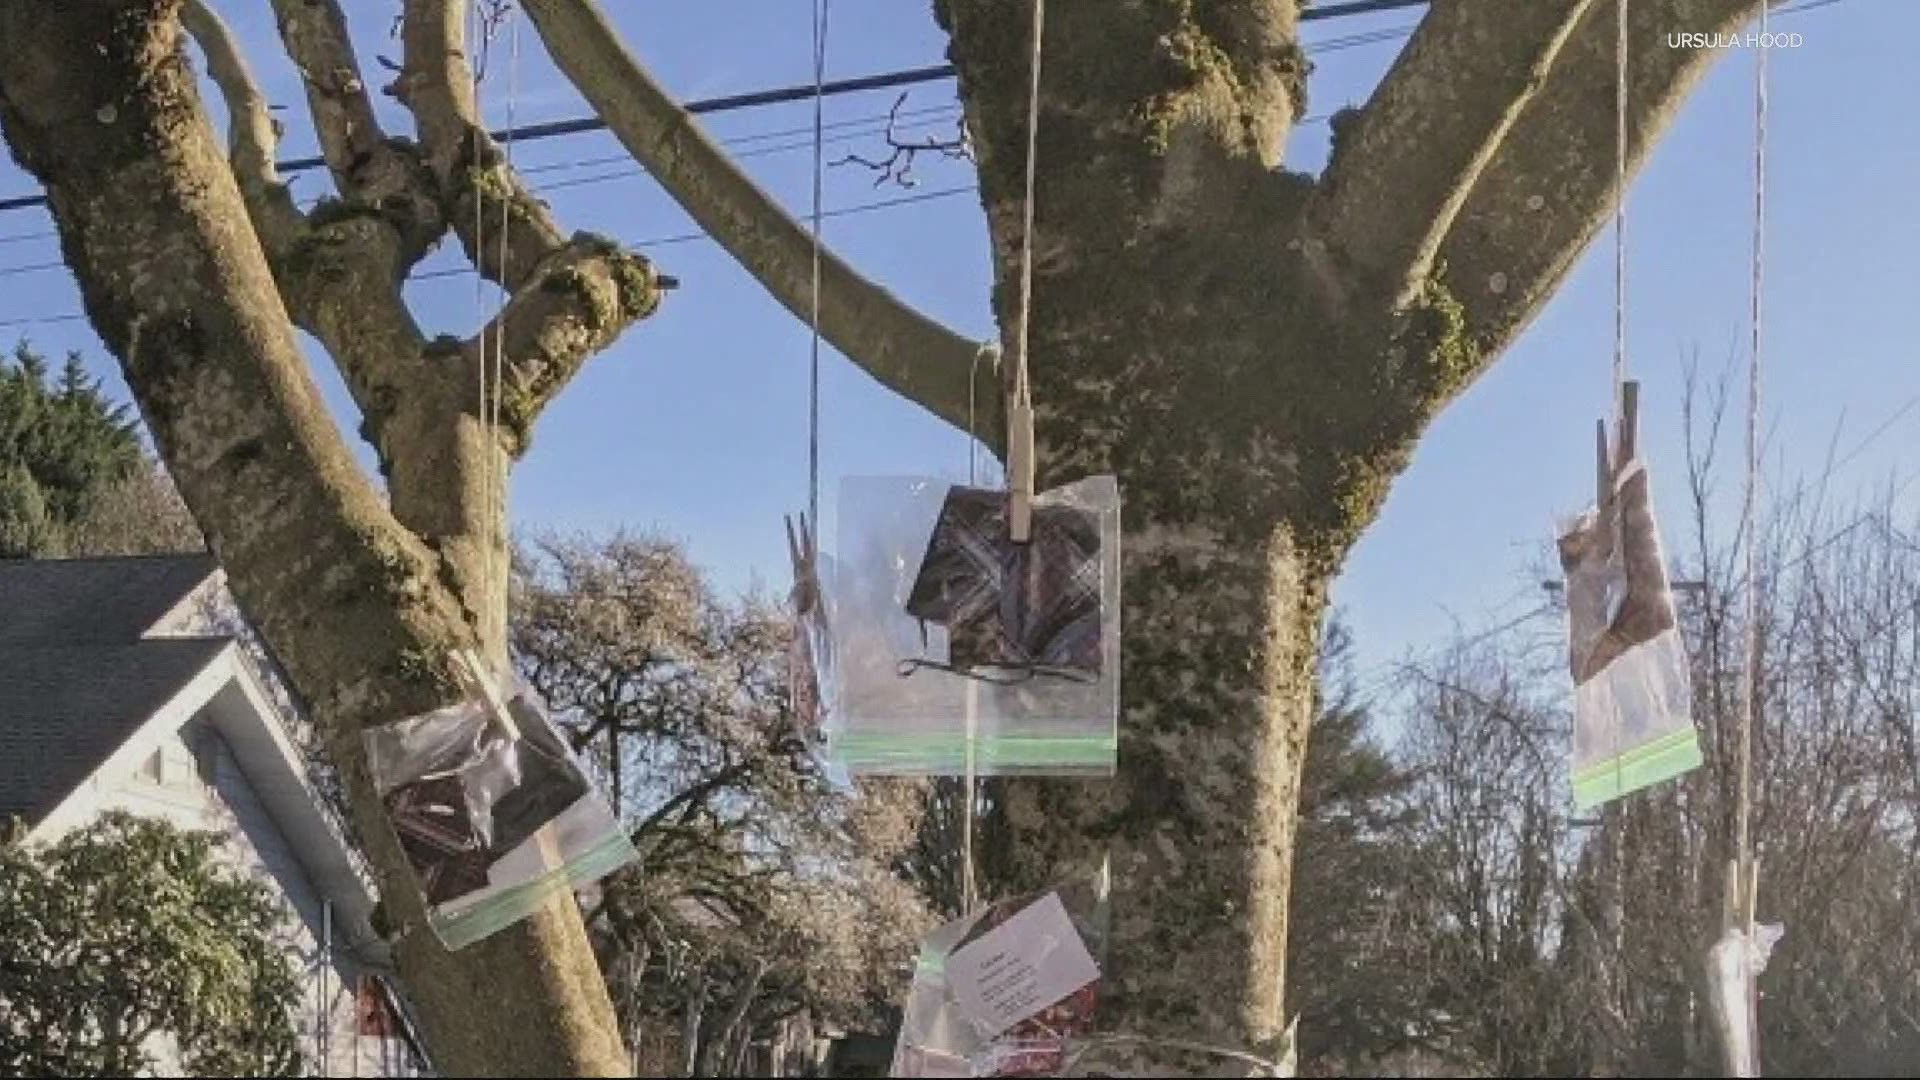 Ursula Hood hangs her handmade facemasks from the branches of a tree and gives them out all over Portland; her daughter nominated her for the award